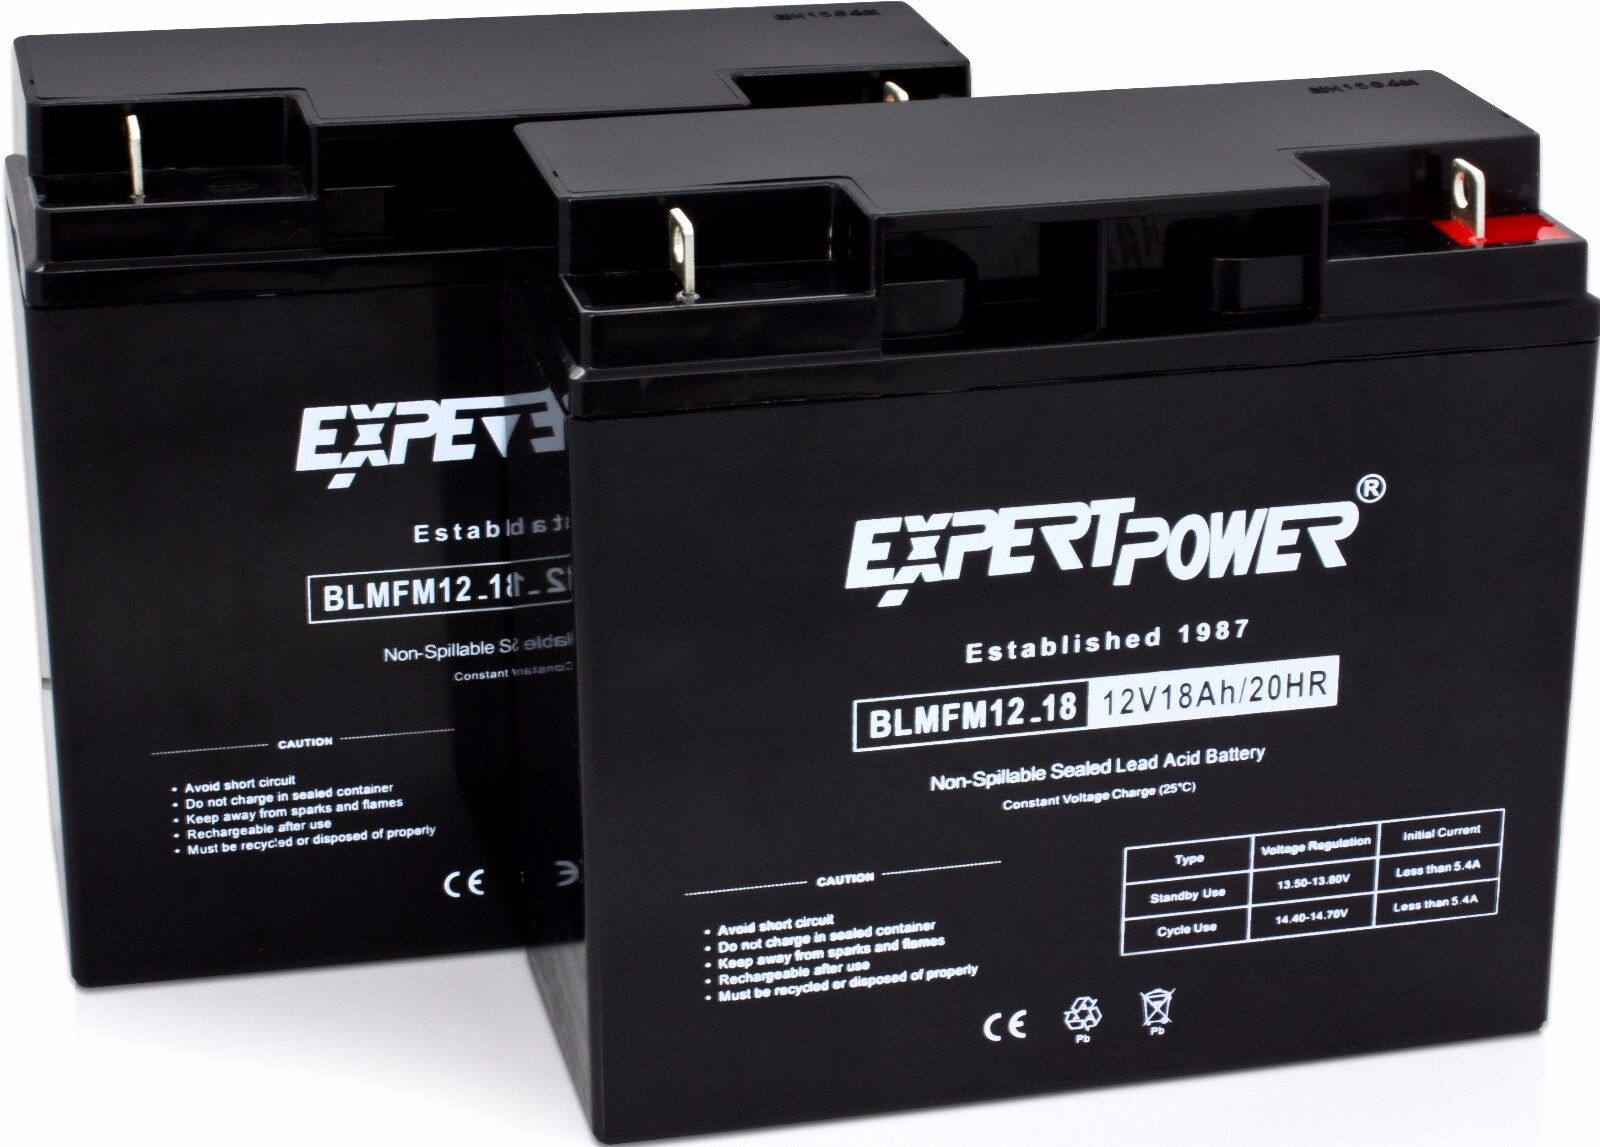 2 PACK Expert Power APC RBC7 Cartridge Battery Replacement for UPS Backup System ExpertPower EXP12180